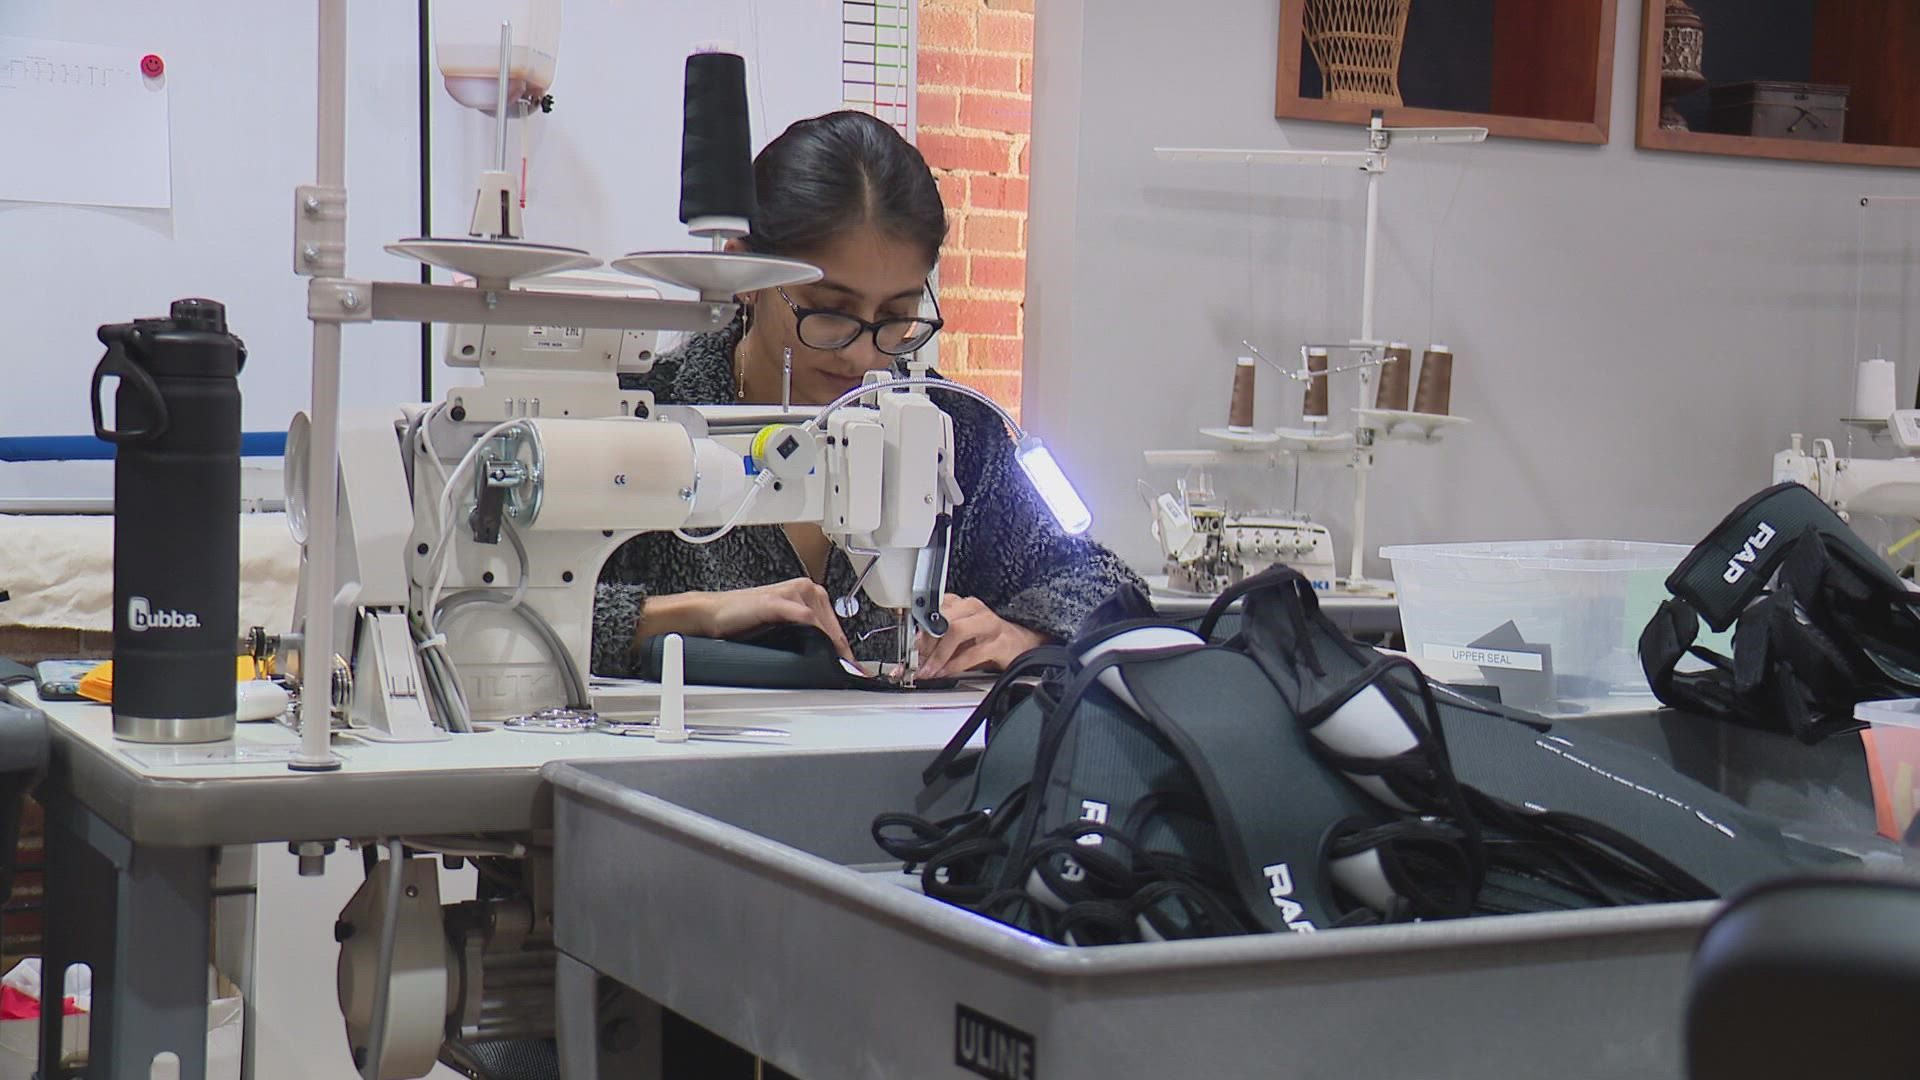 The Collective Thread is a nonprofit business that has found success finding and retaining skilled workers to support small-batch clothing manufacturing.